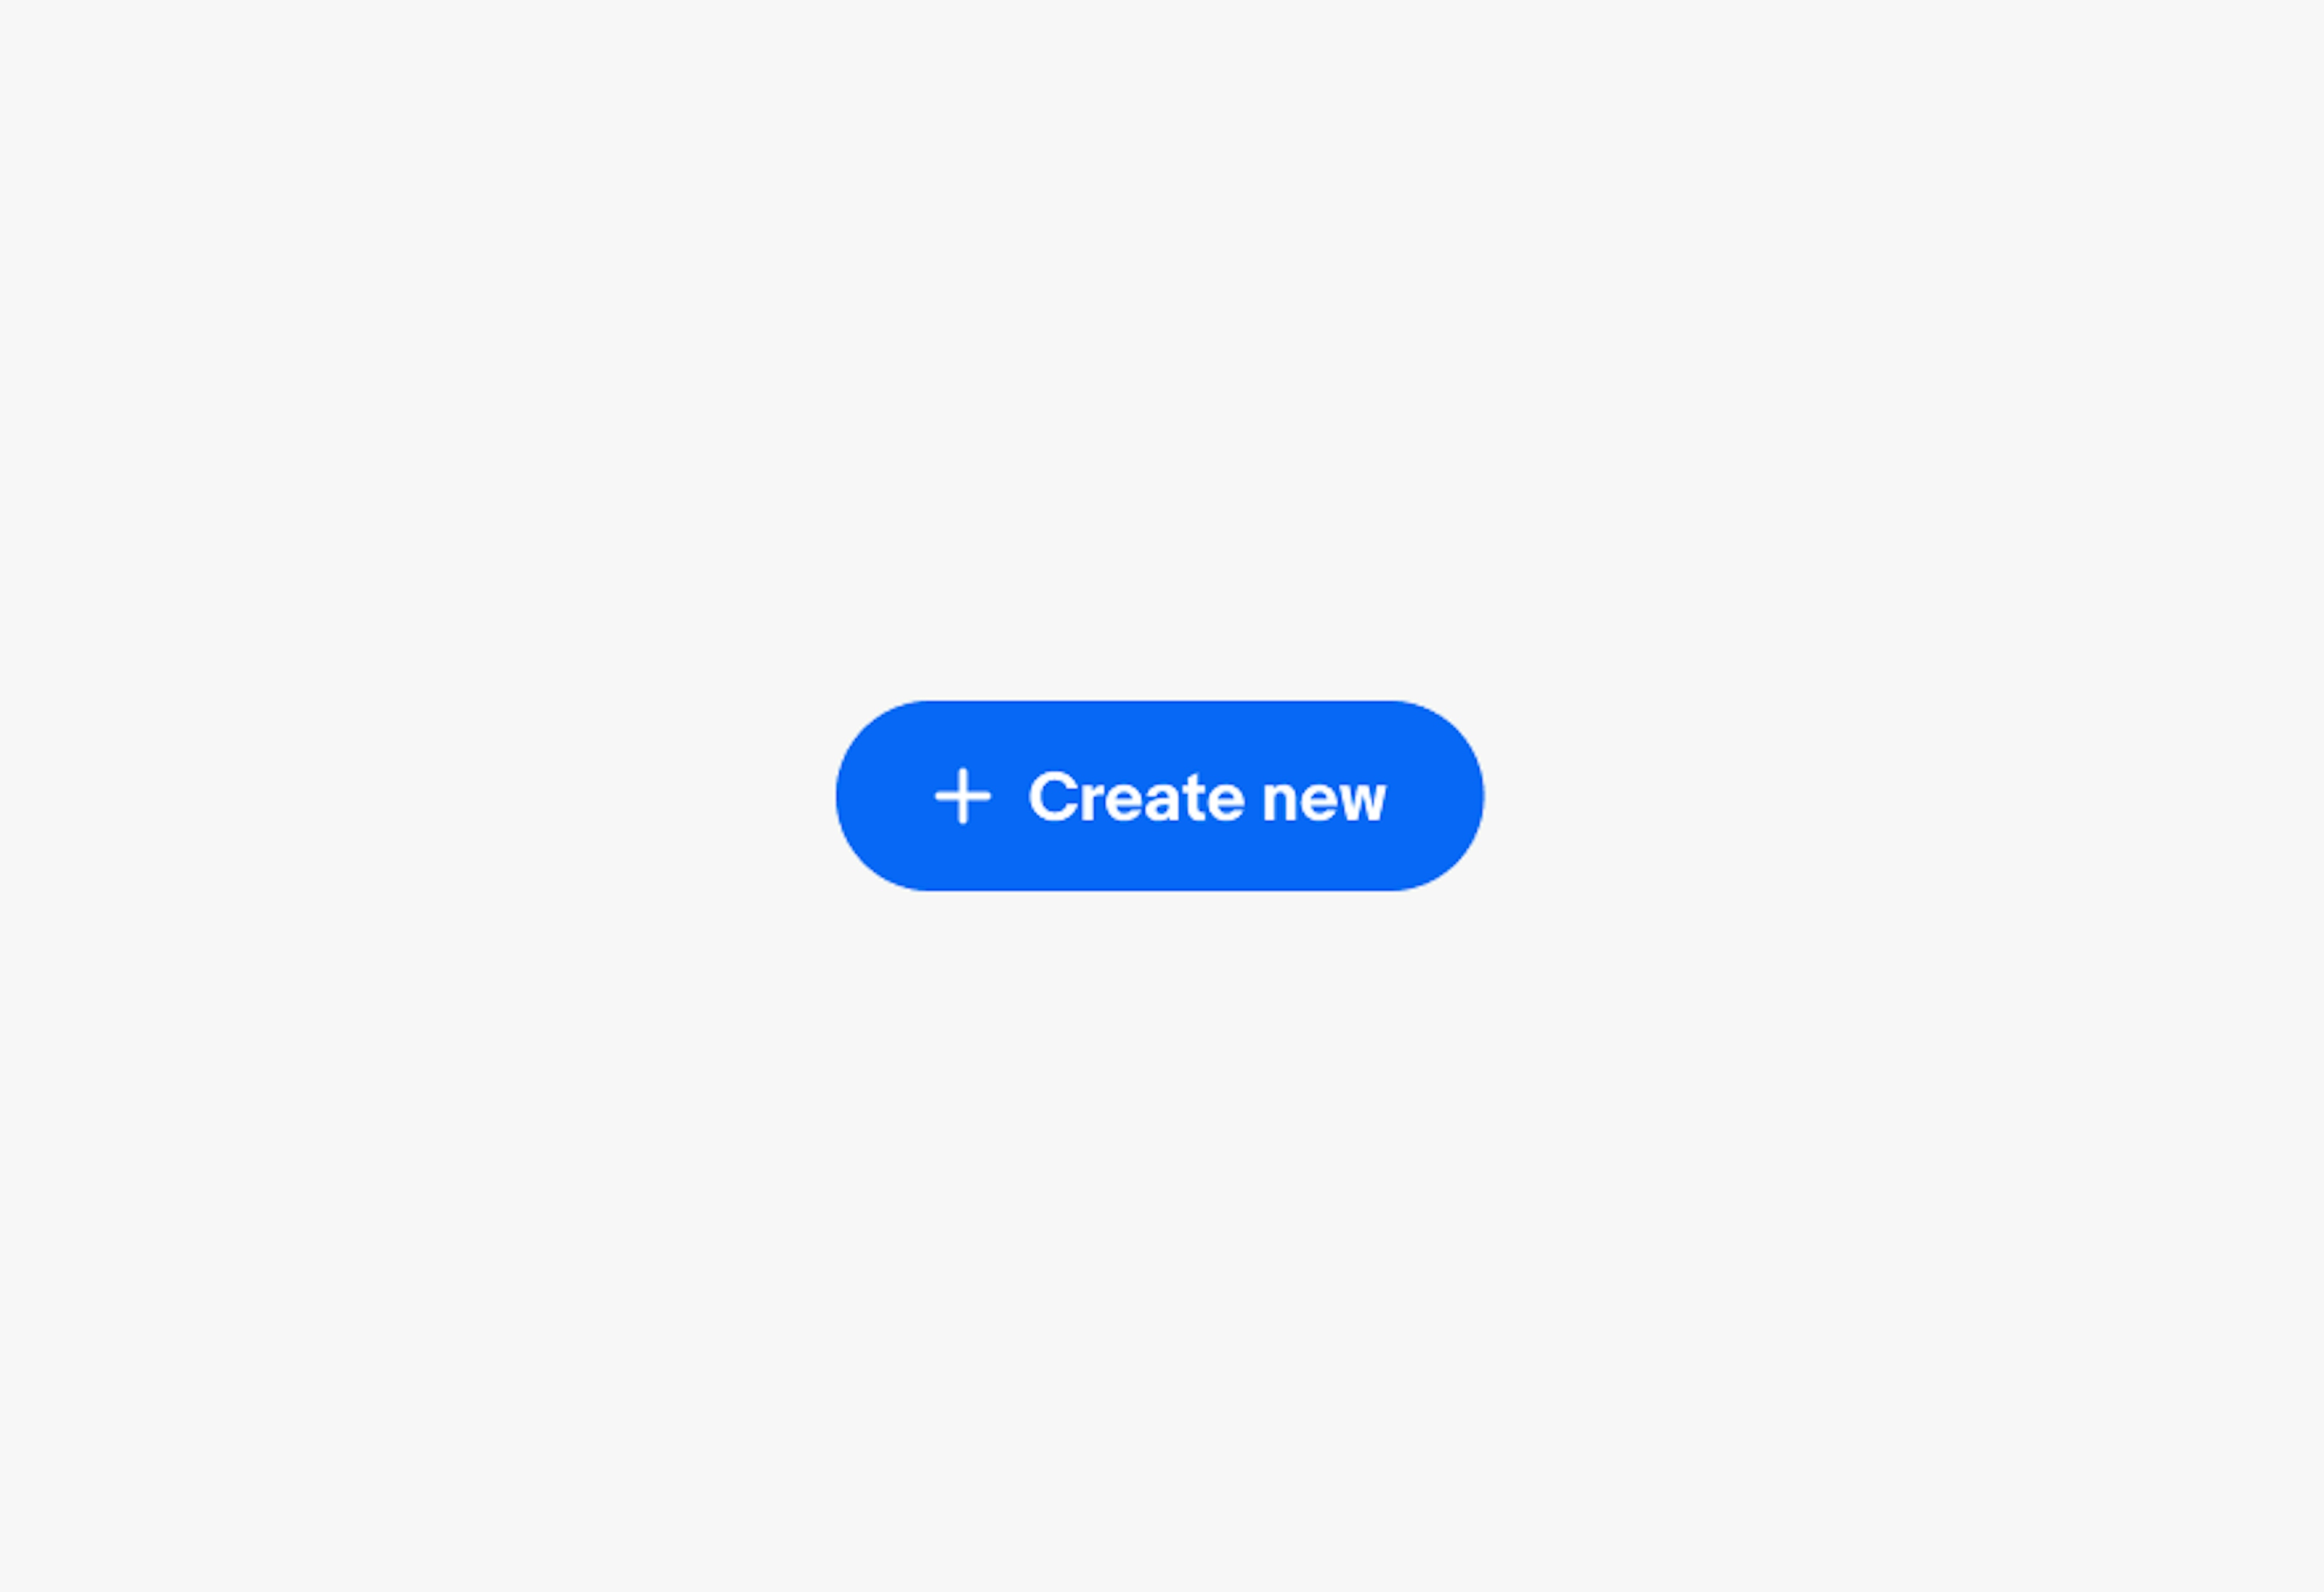 A blue enabled cta button with a plus icon next to “Create now”.